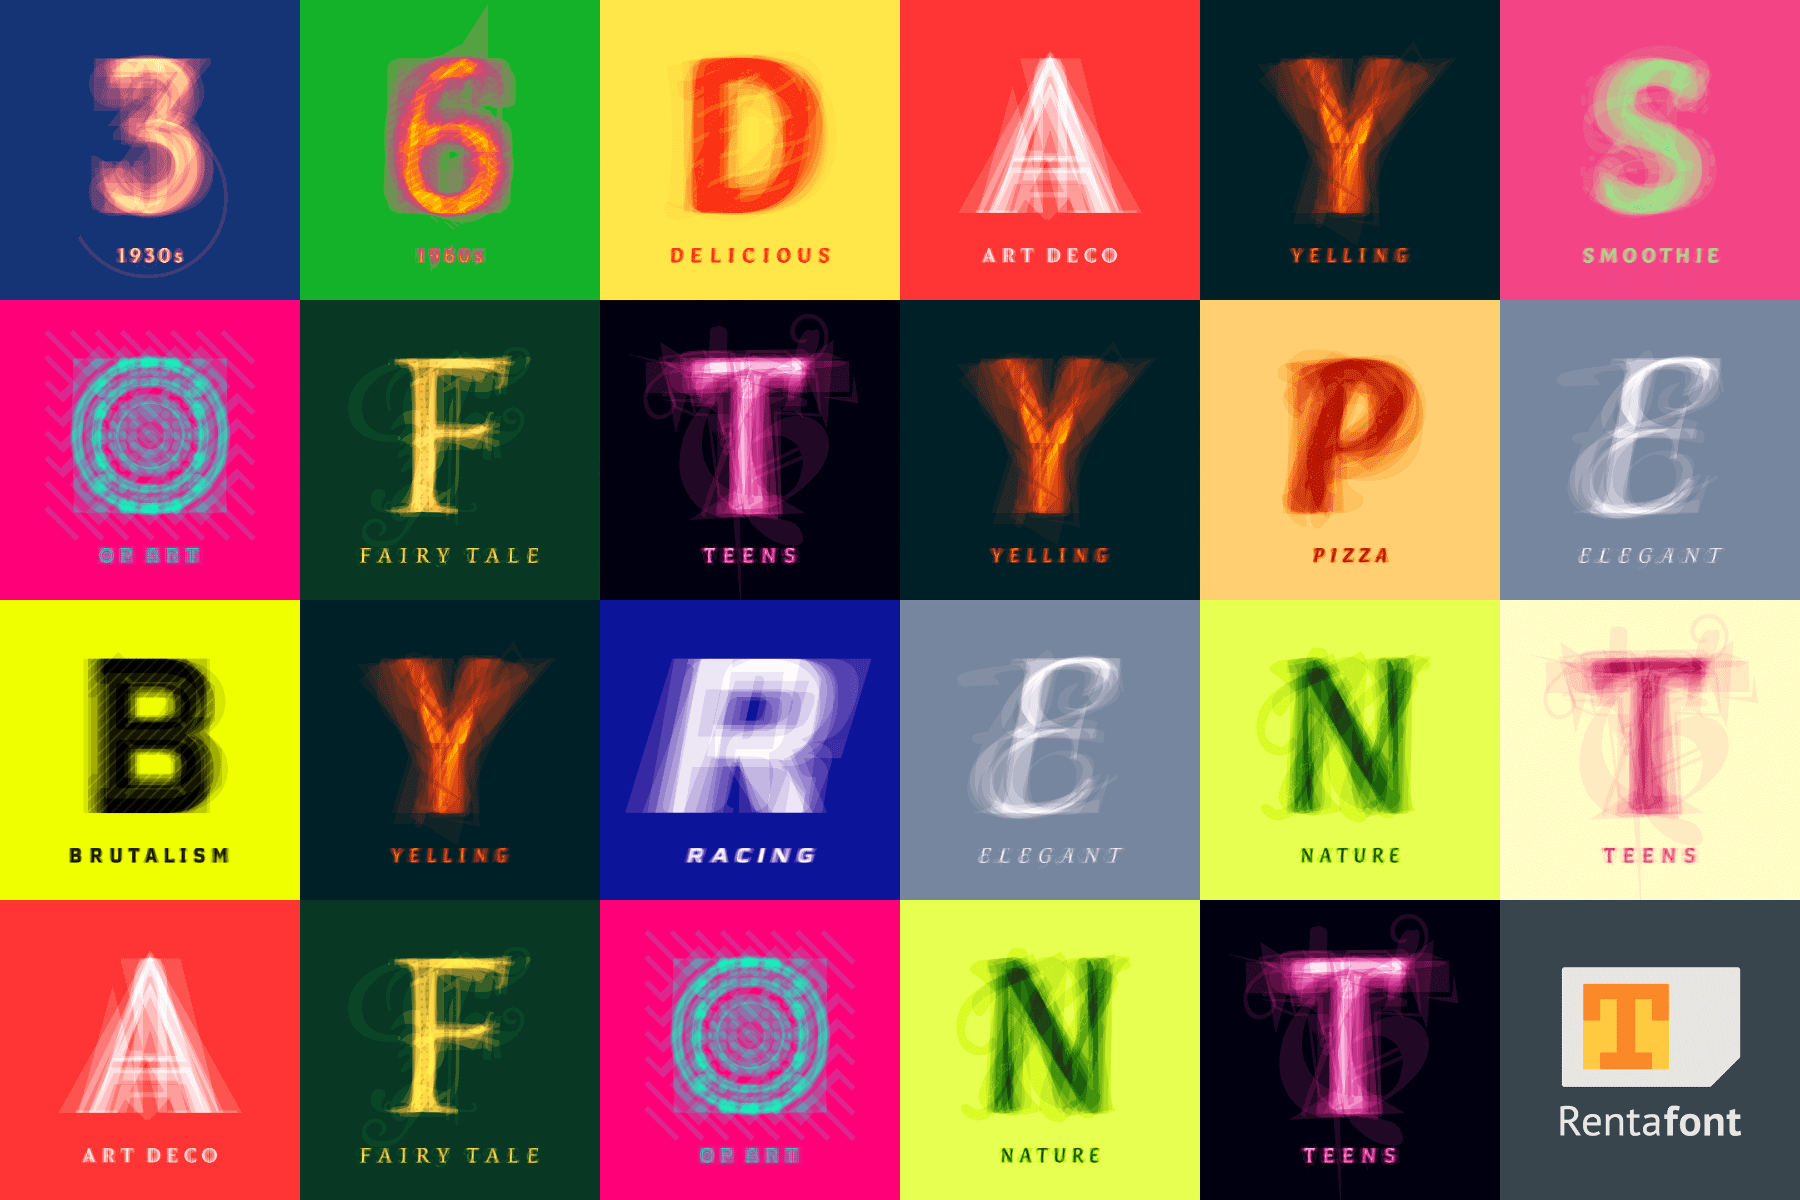 36daysoftype_Cover